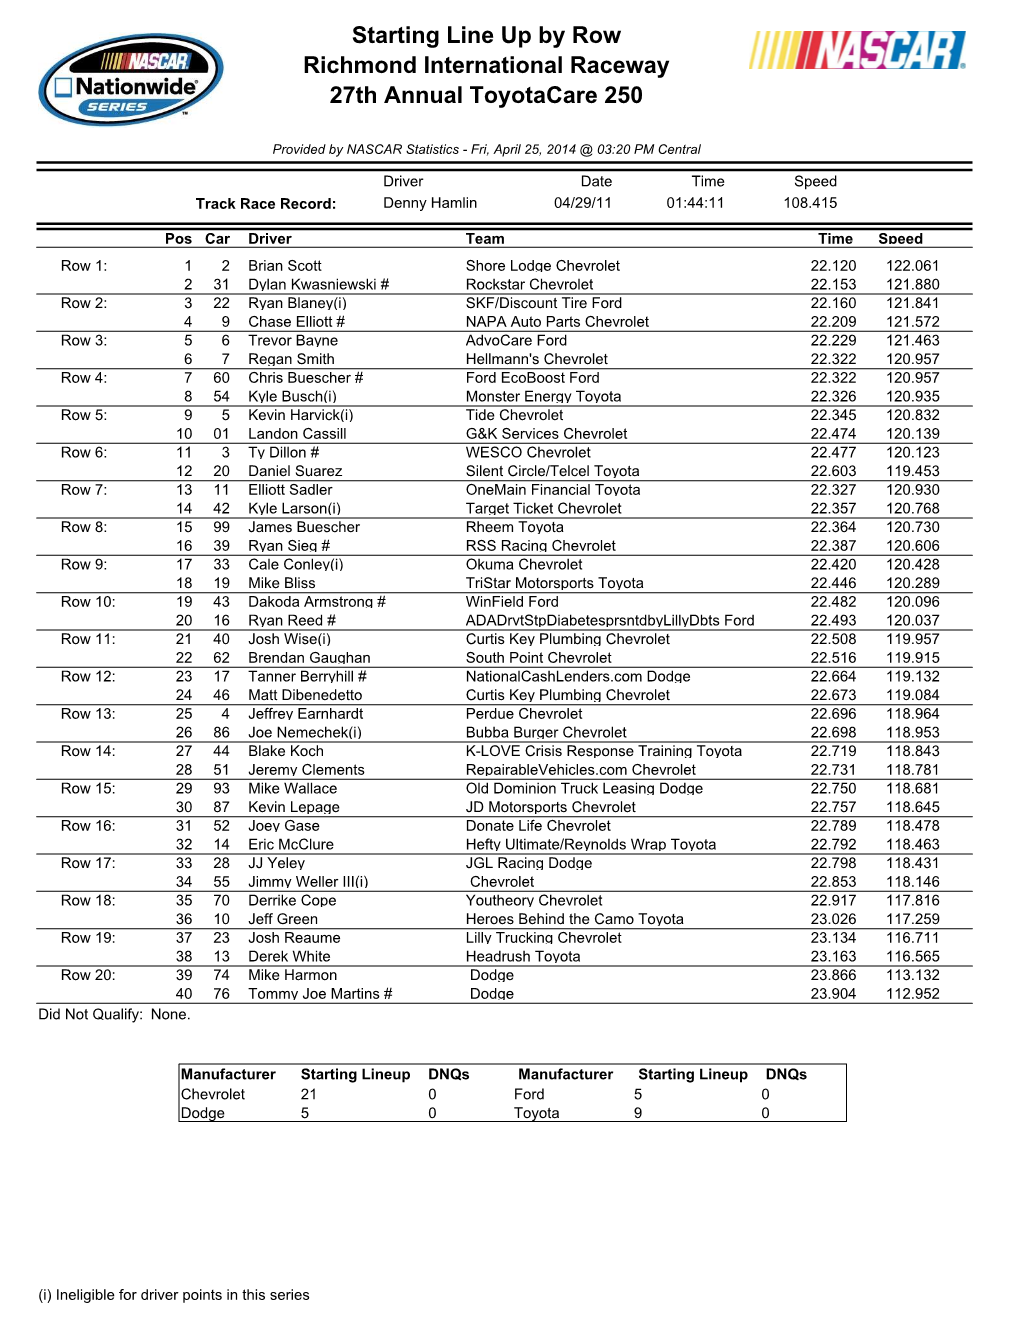 Starting Line up by Row Richmond International Raceway 27Th Annual Toyotacare 250